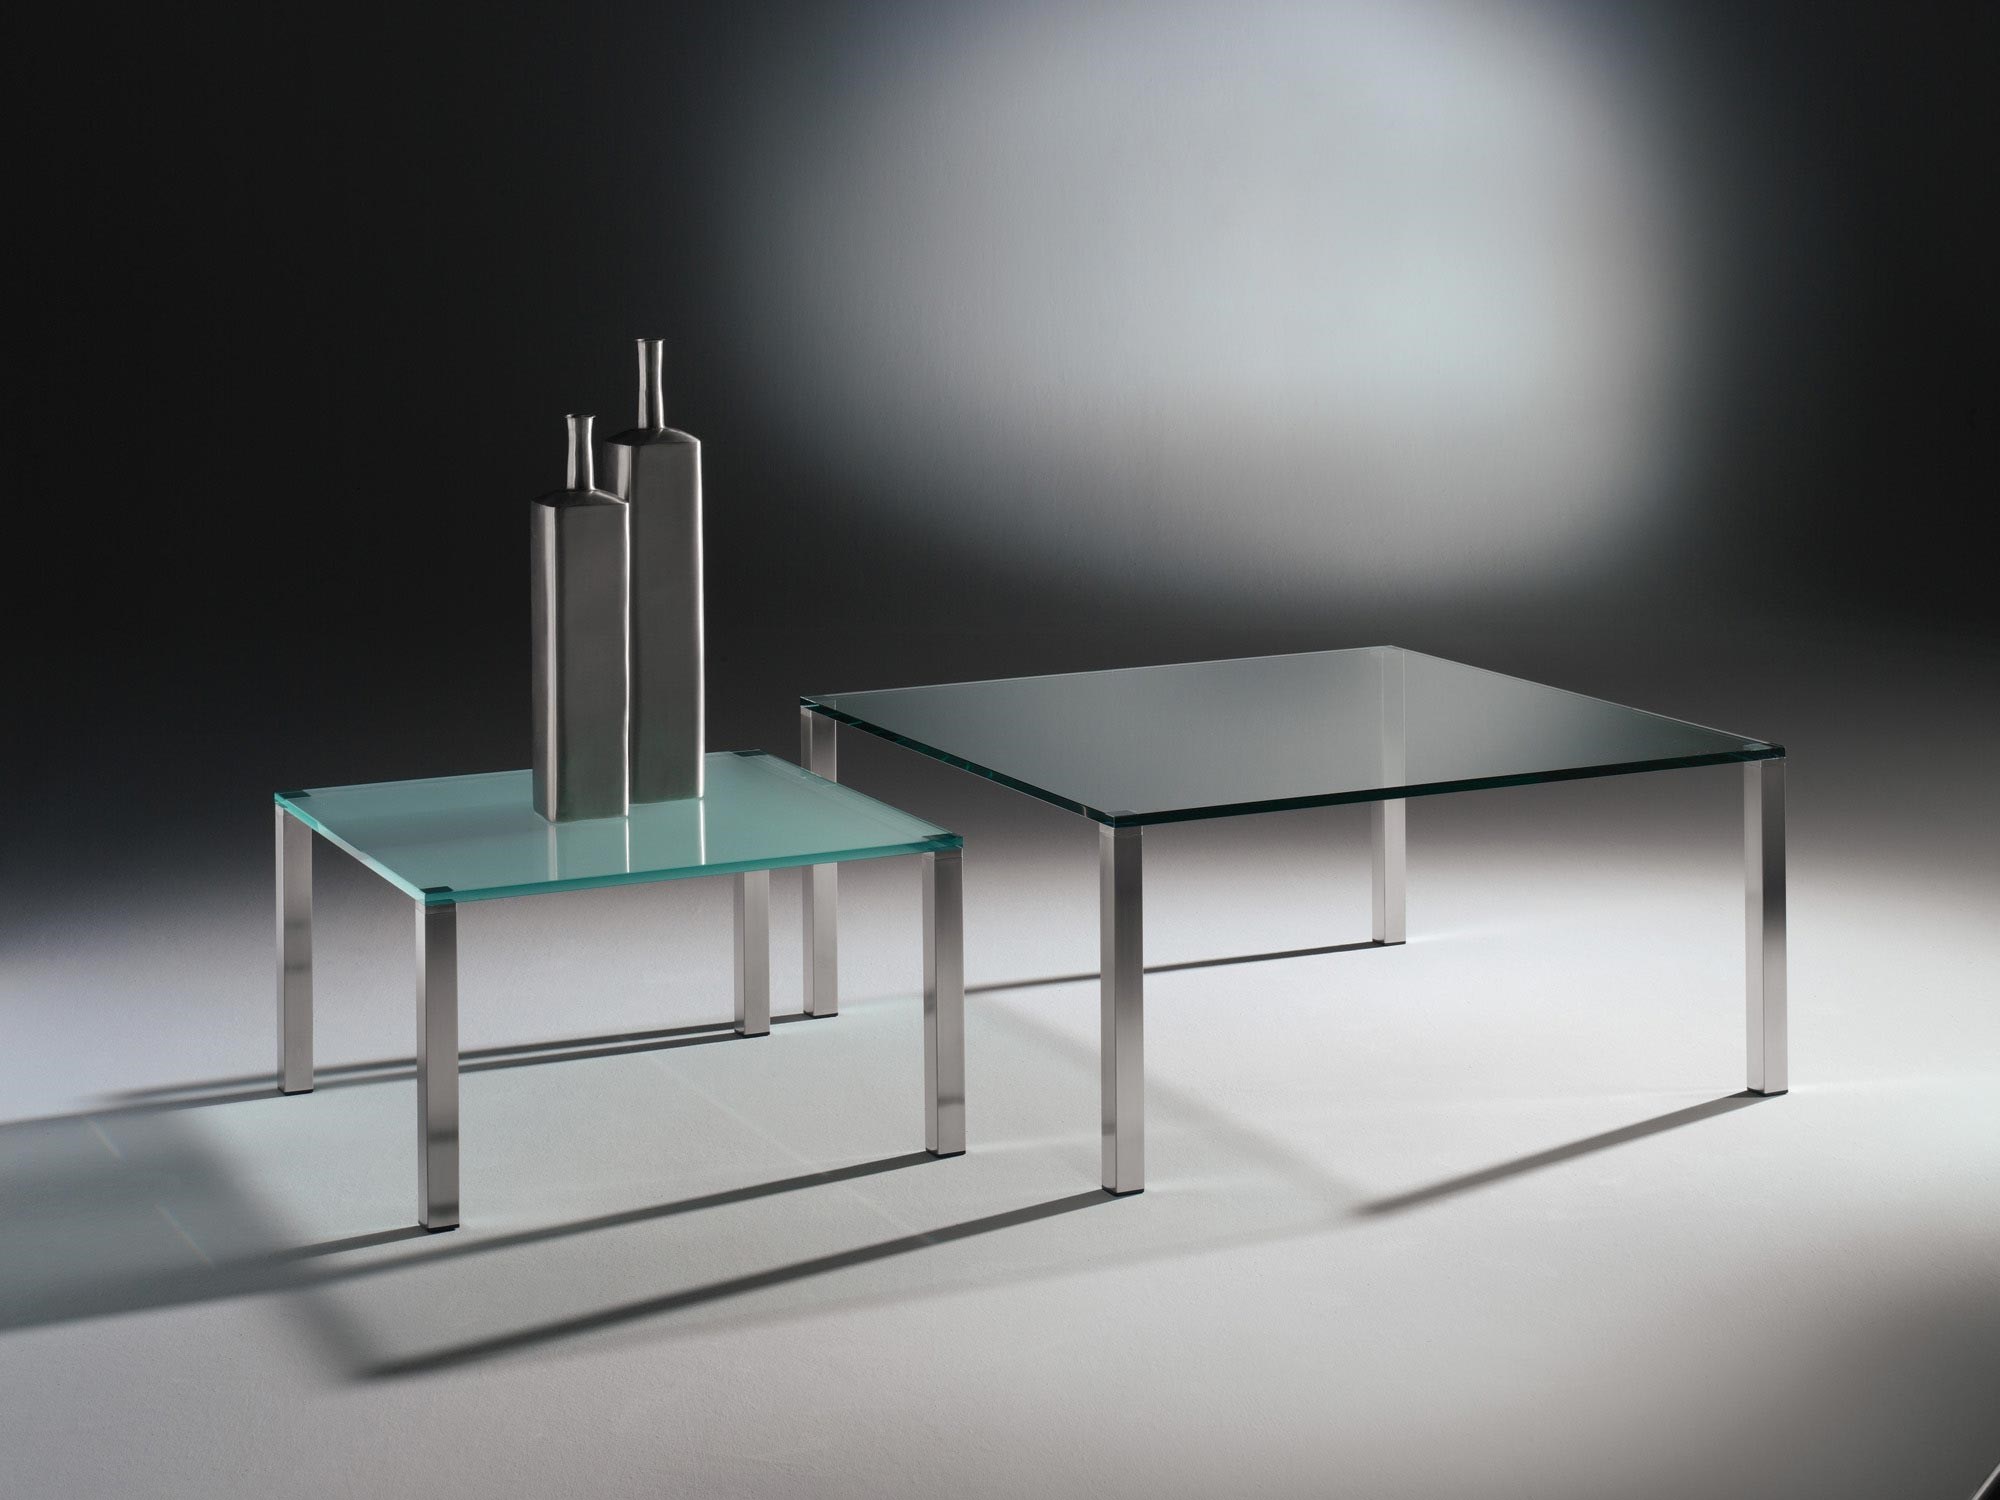 Glass cocktail table QUADRO by DREIECK DESIGN: Q 7740 - FLOATGLASS satinated + Q 1146 - FLOATGLASS clear - table feet stainless steel brushed